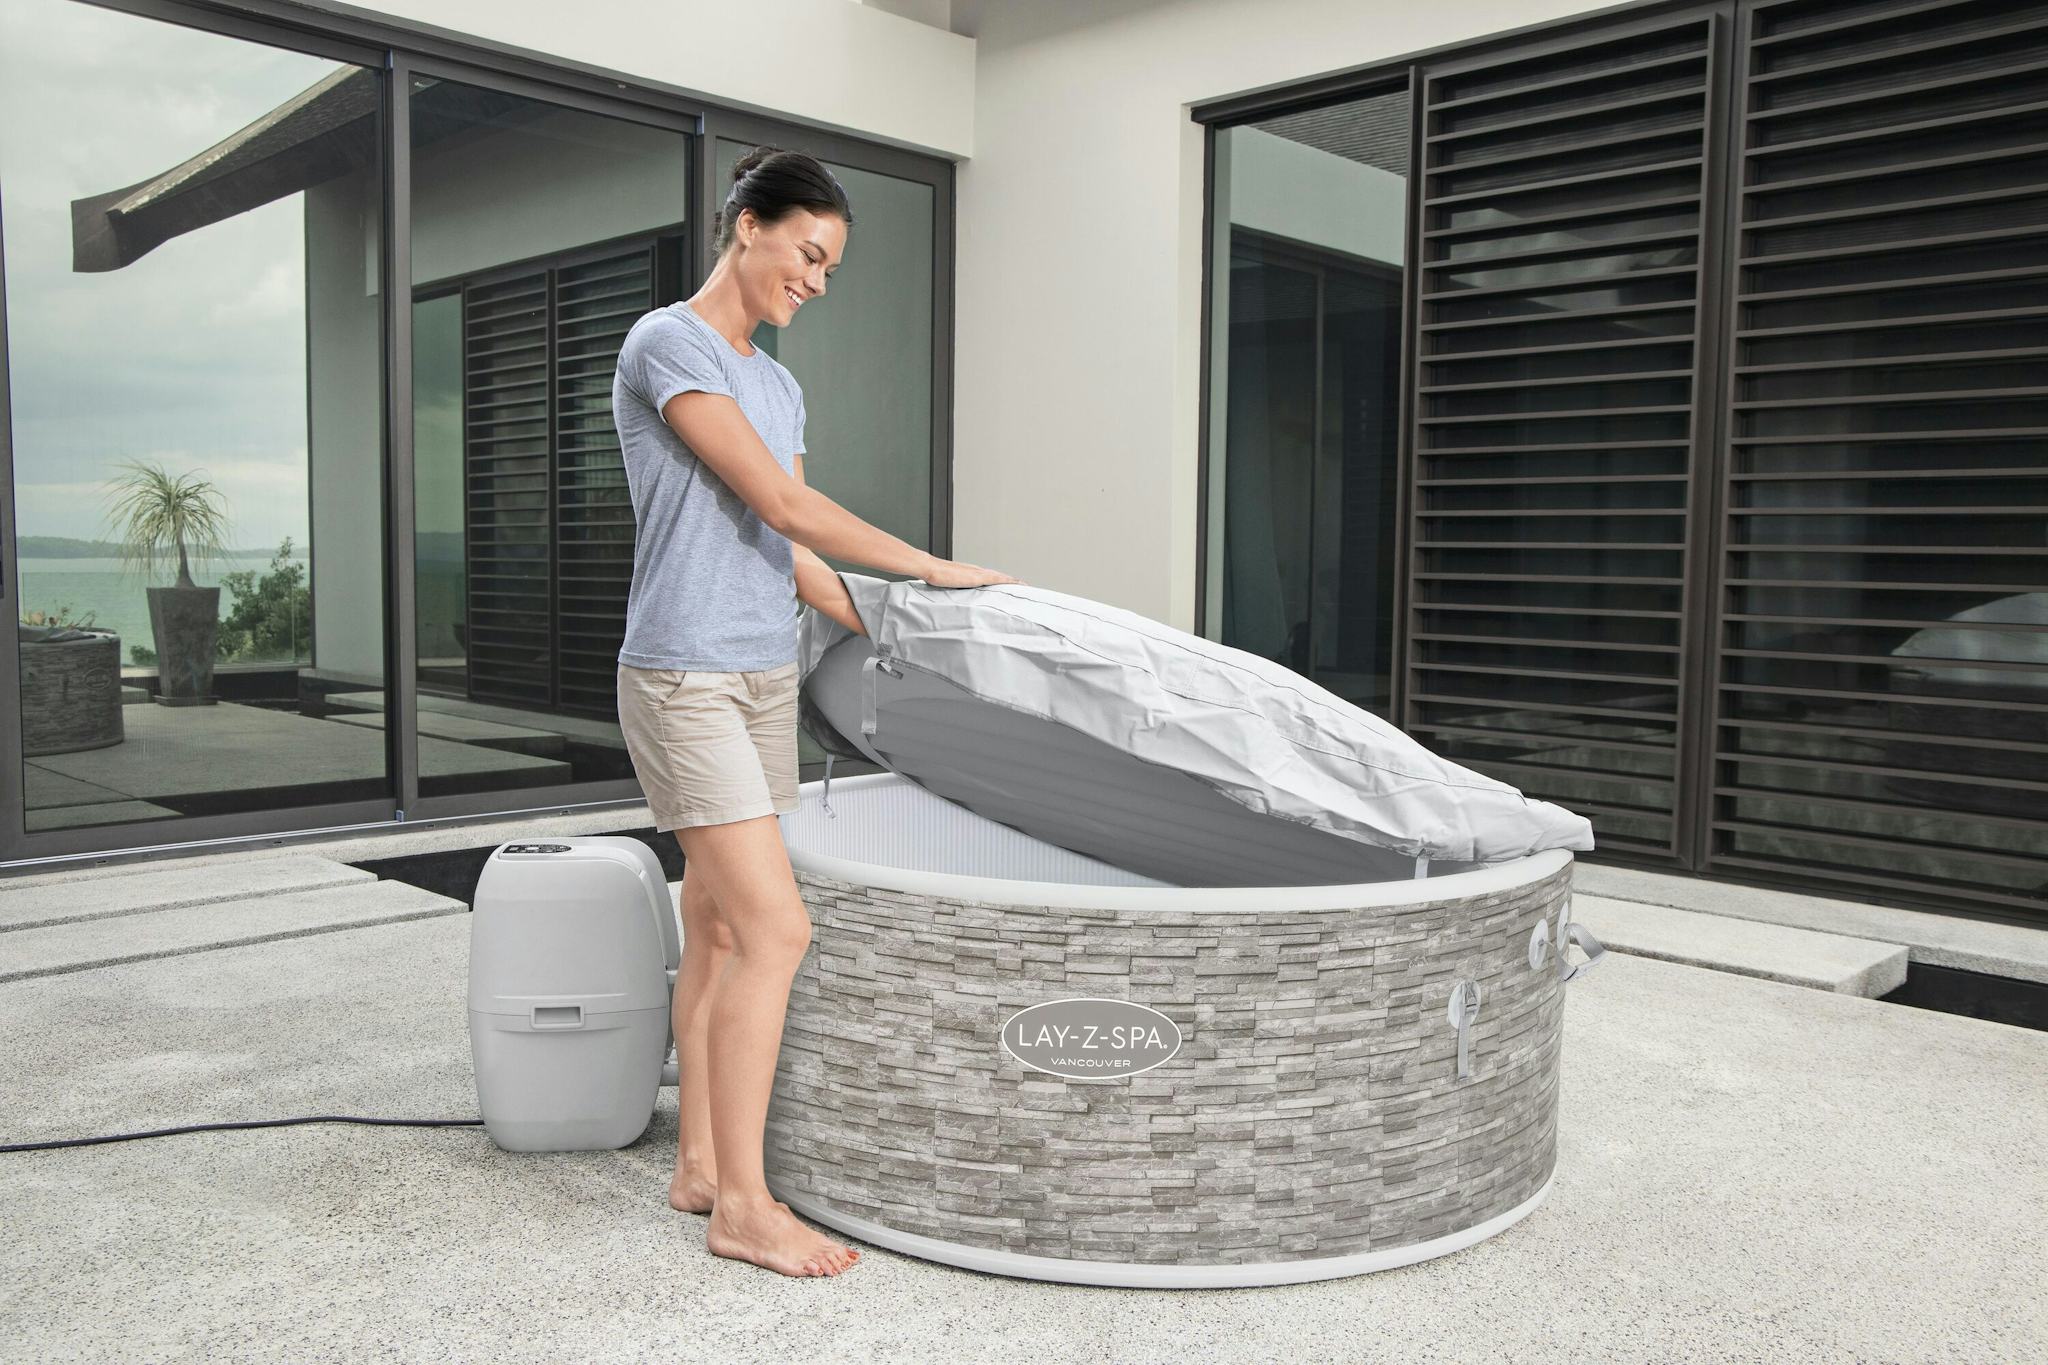 Spas Gonflables Spa gonflable rond Lay-Z-Spa® Vancouver Airjet Plus™ 3 - 5 personnes Bestway 17